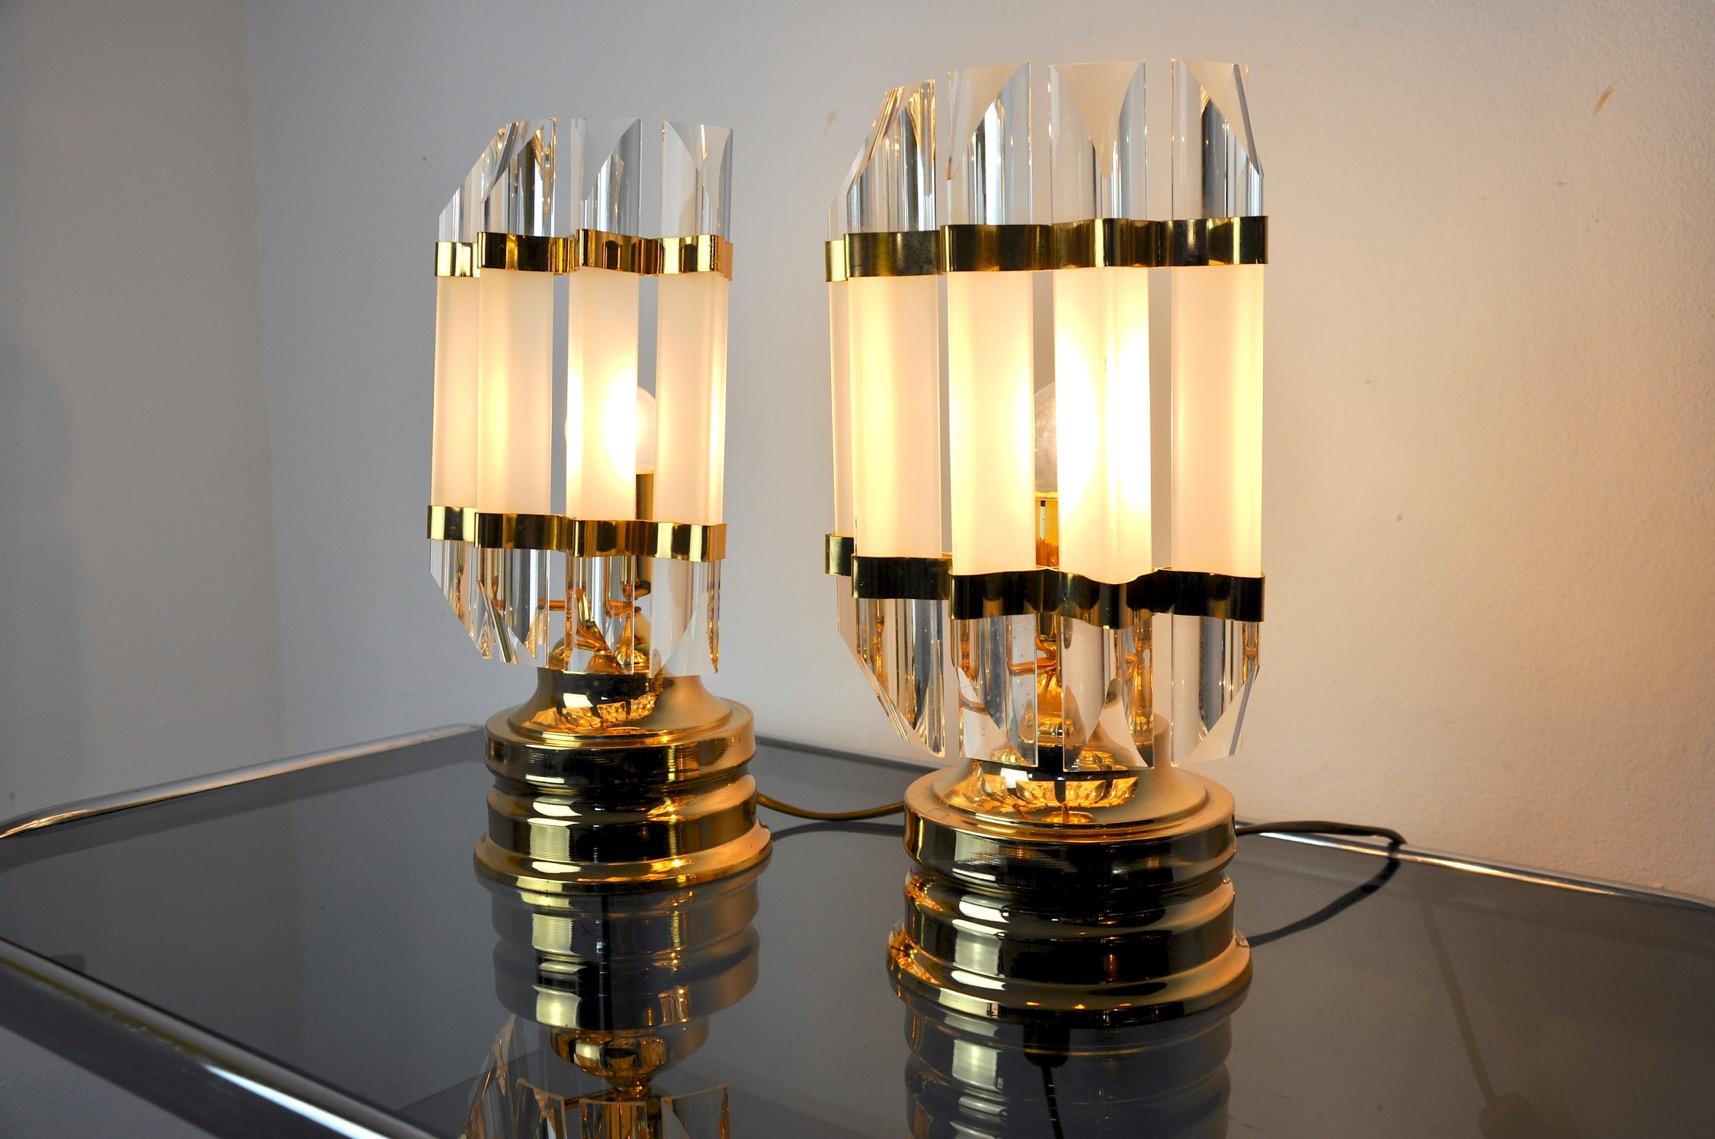 Pair of Venini Lamps, Murano Glass, Italy, 1980 For Sale 1